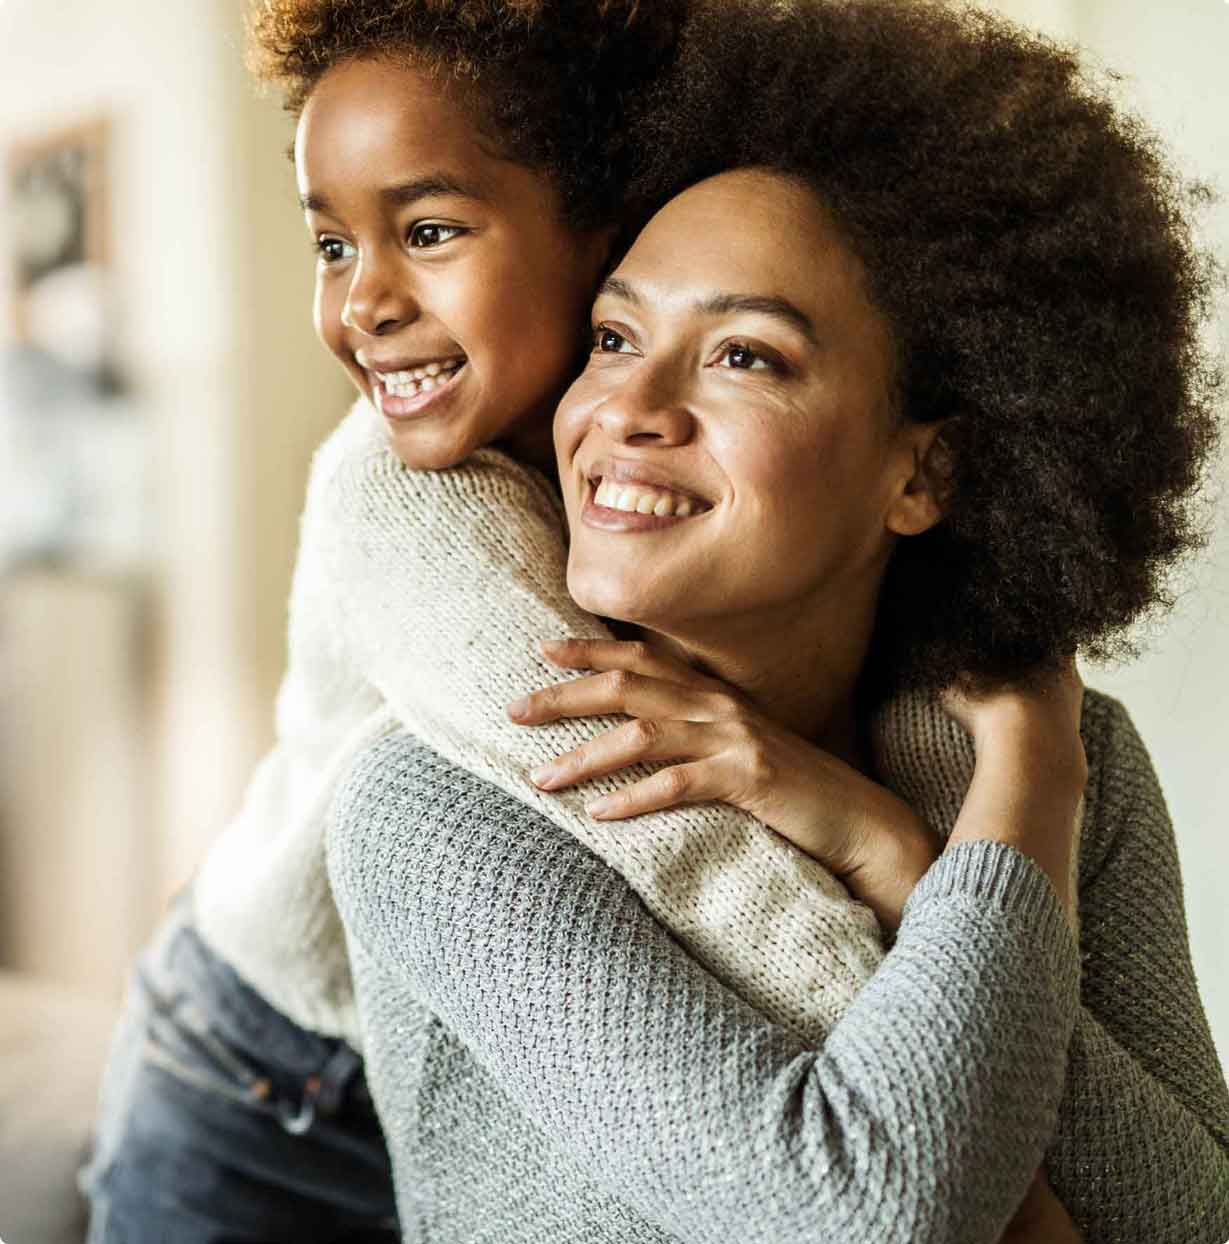 Affectionate African American mother and daughter embracing at home